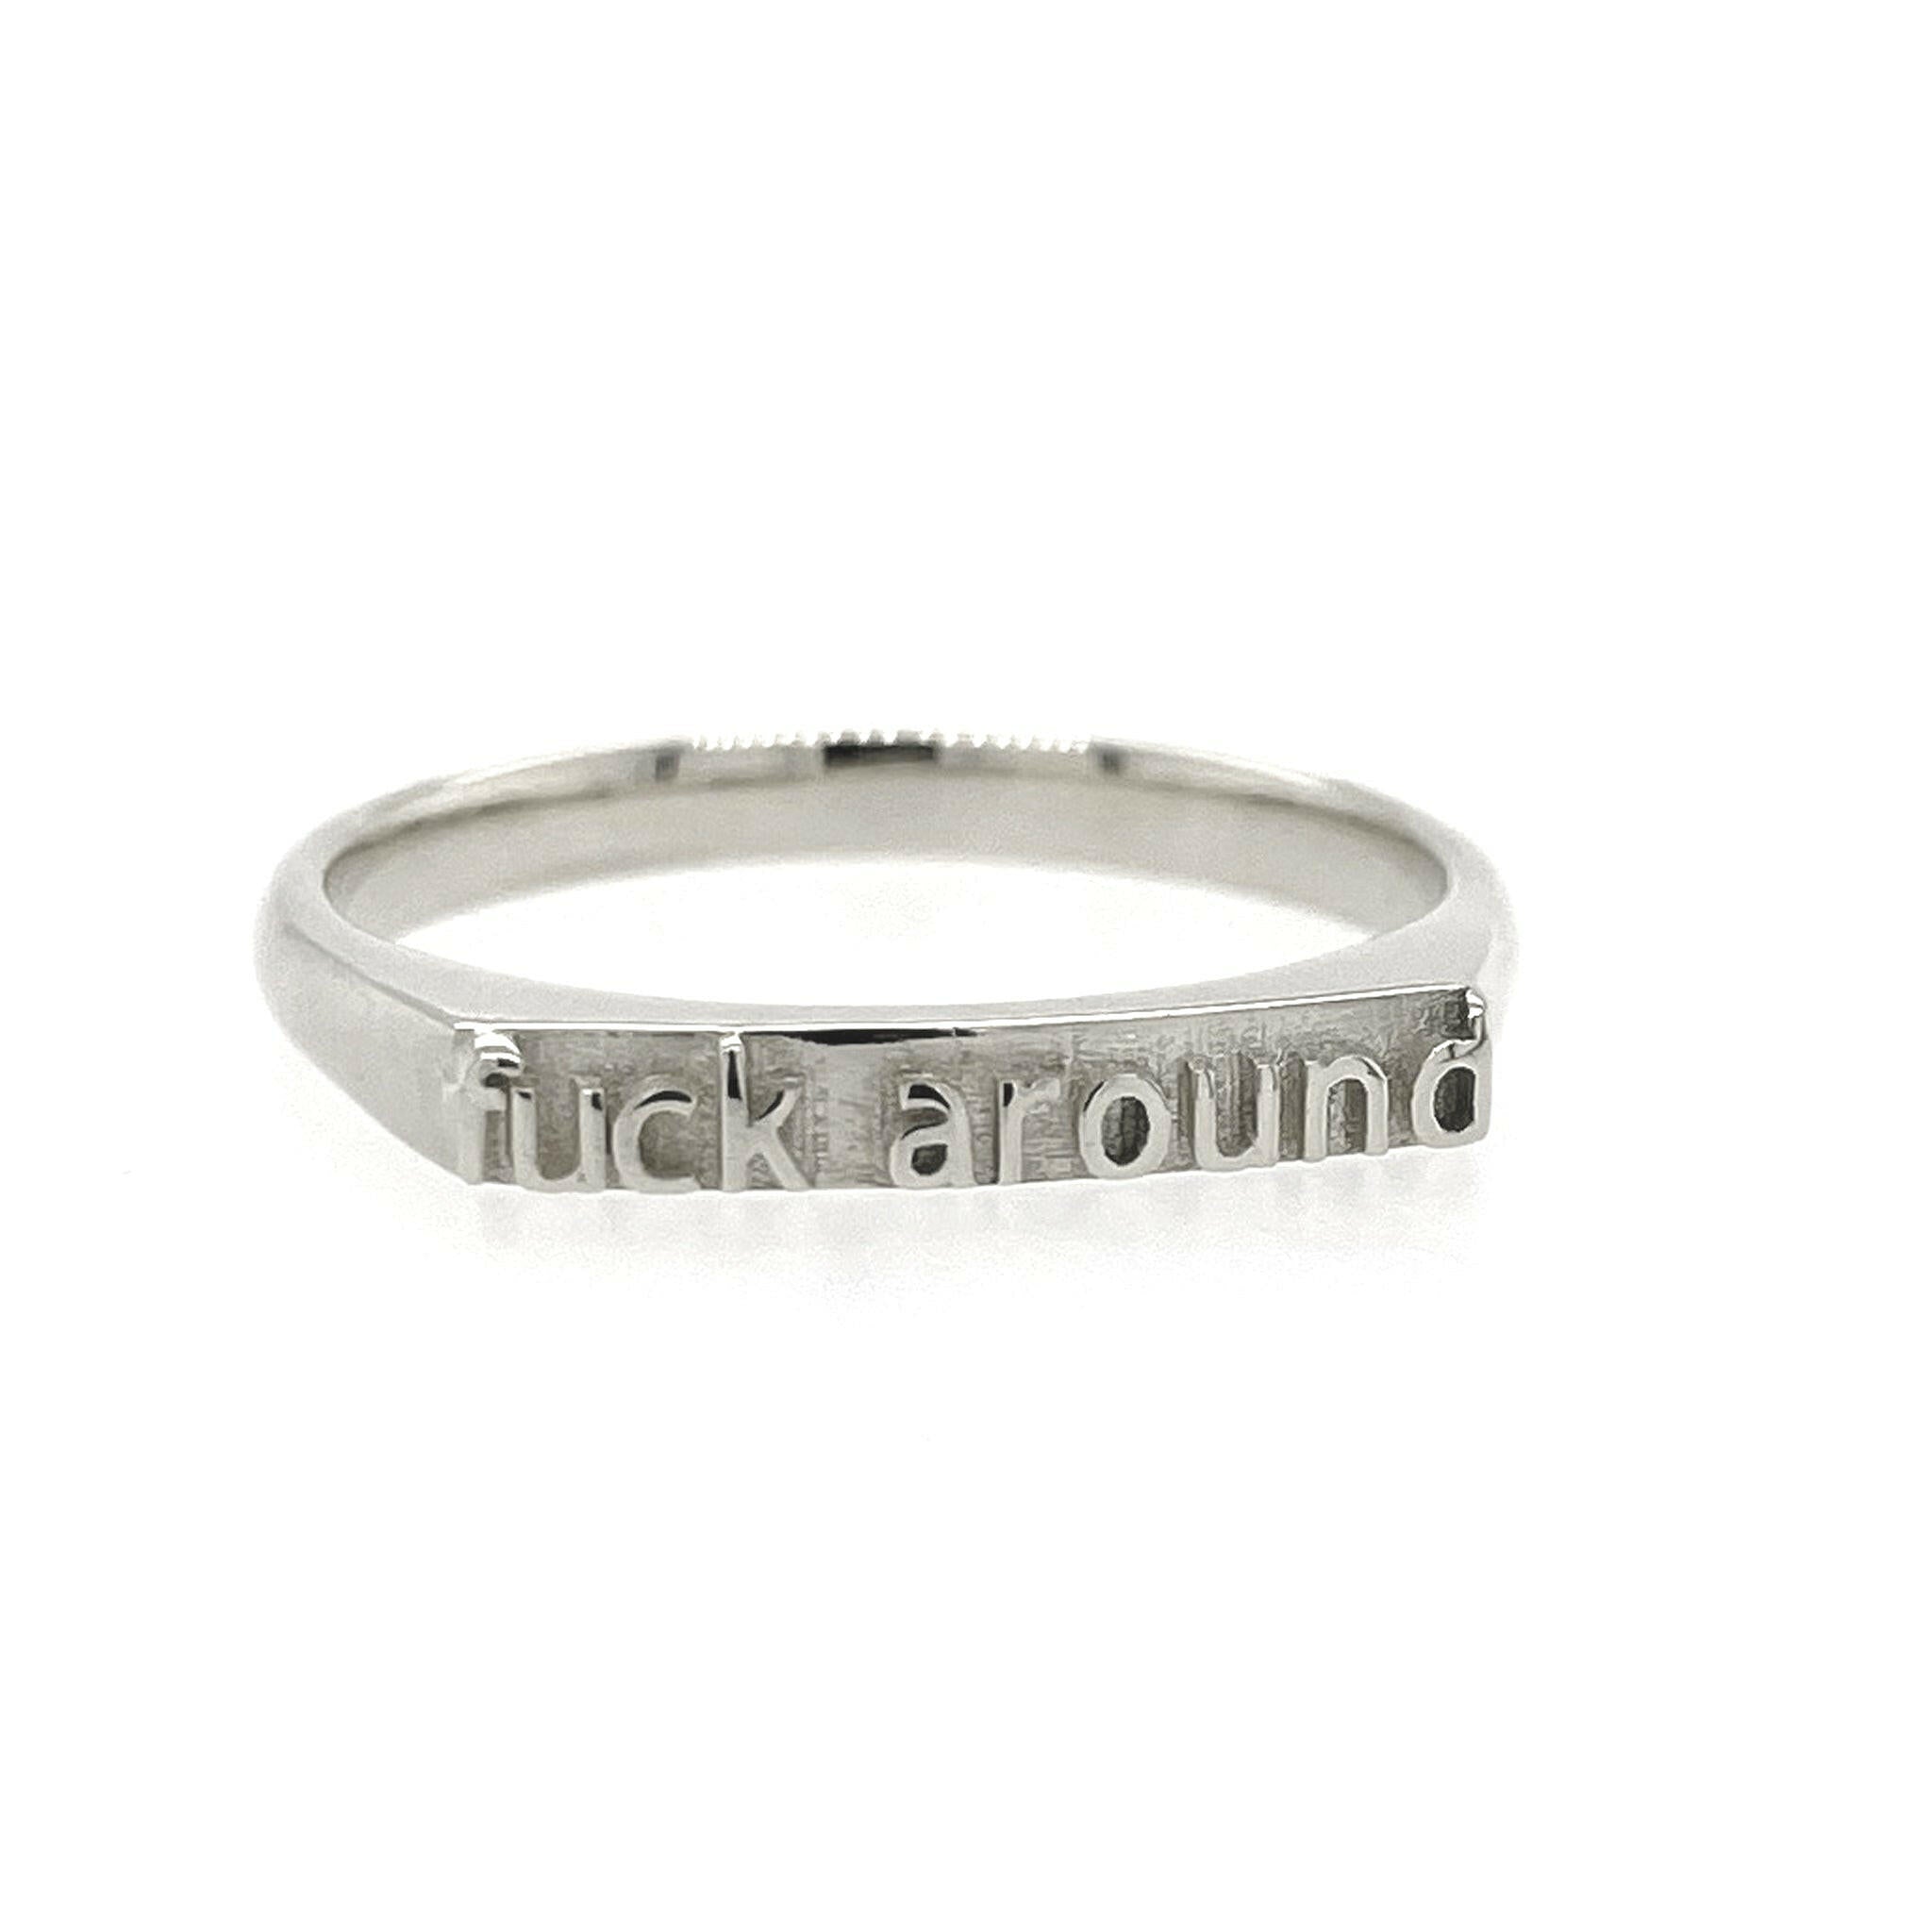 Front view of sterling silver ring that reads "fuck around" in text.